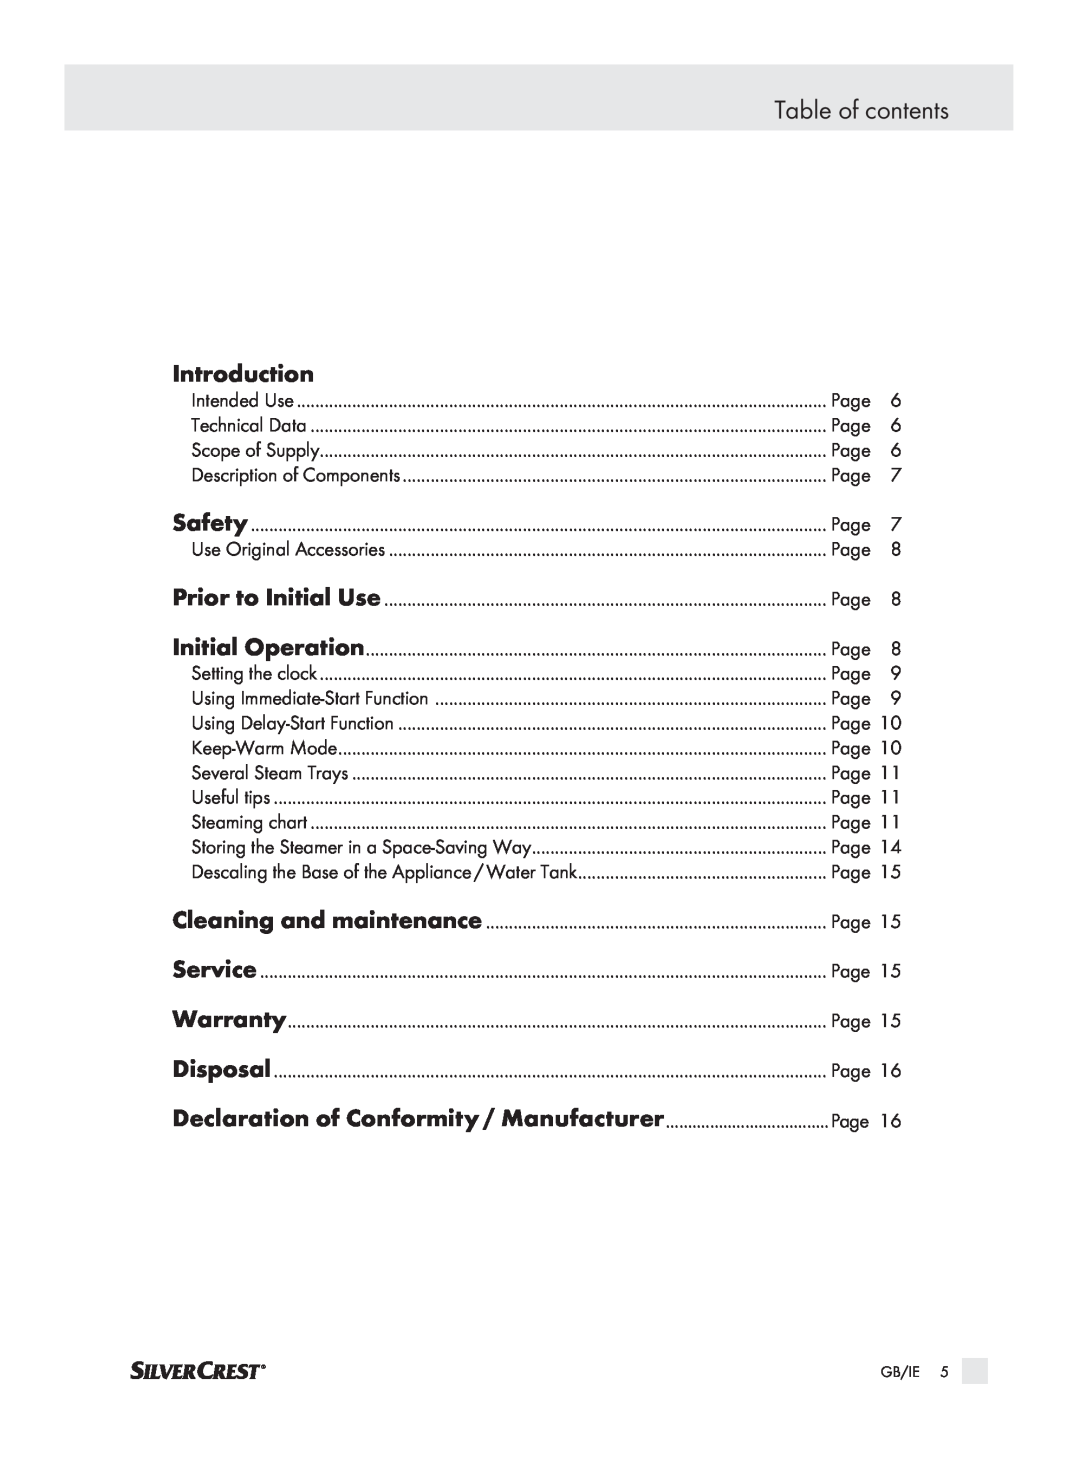 Kompernass SDG 800 A1 manual Table of contents, Introduction, Declaration of Conformity / Manufacturer 